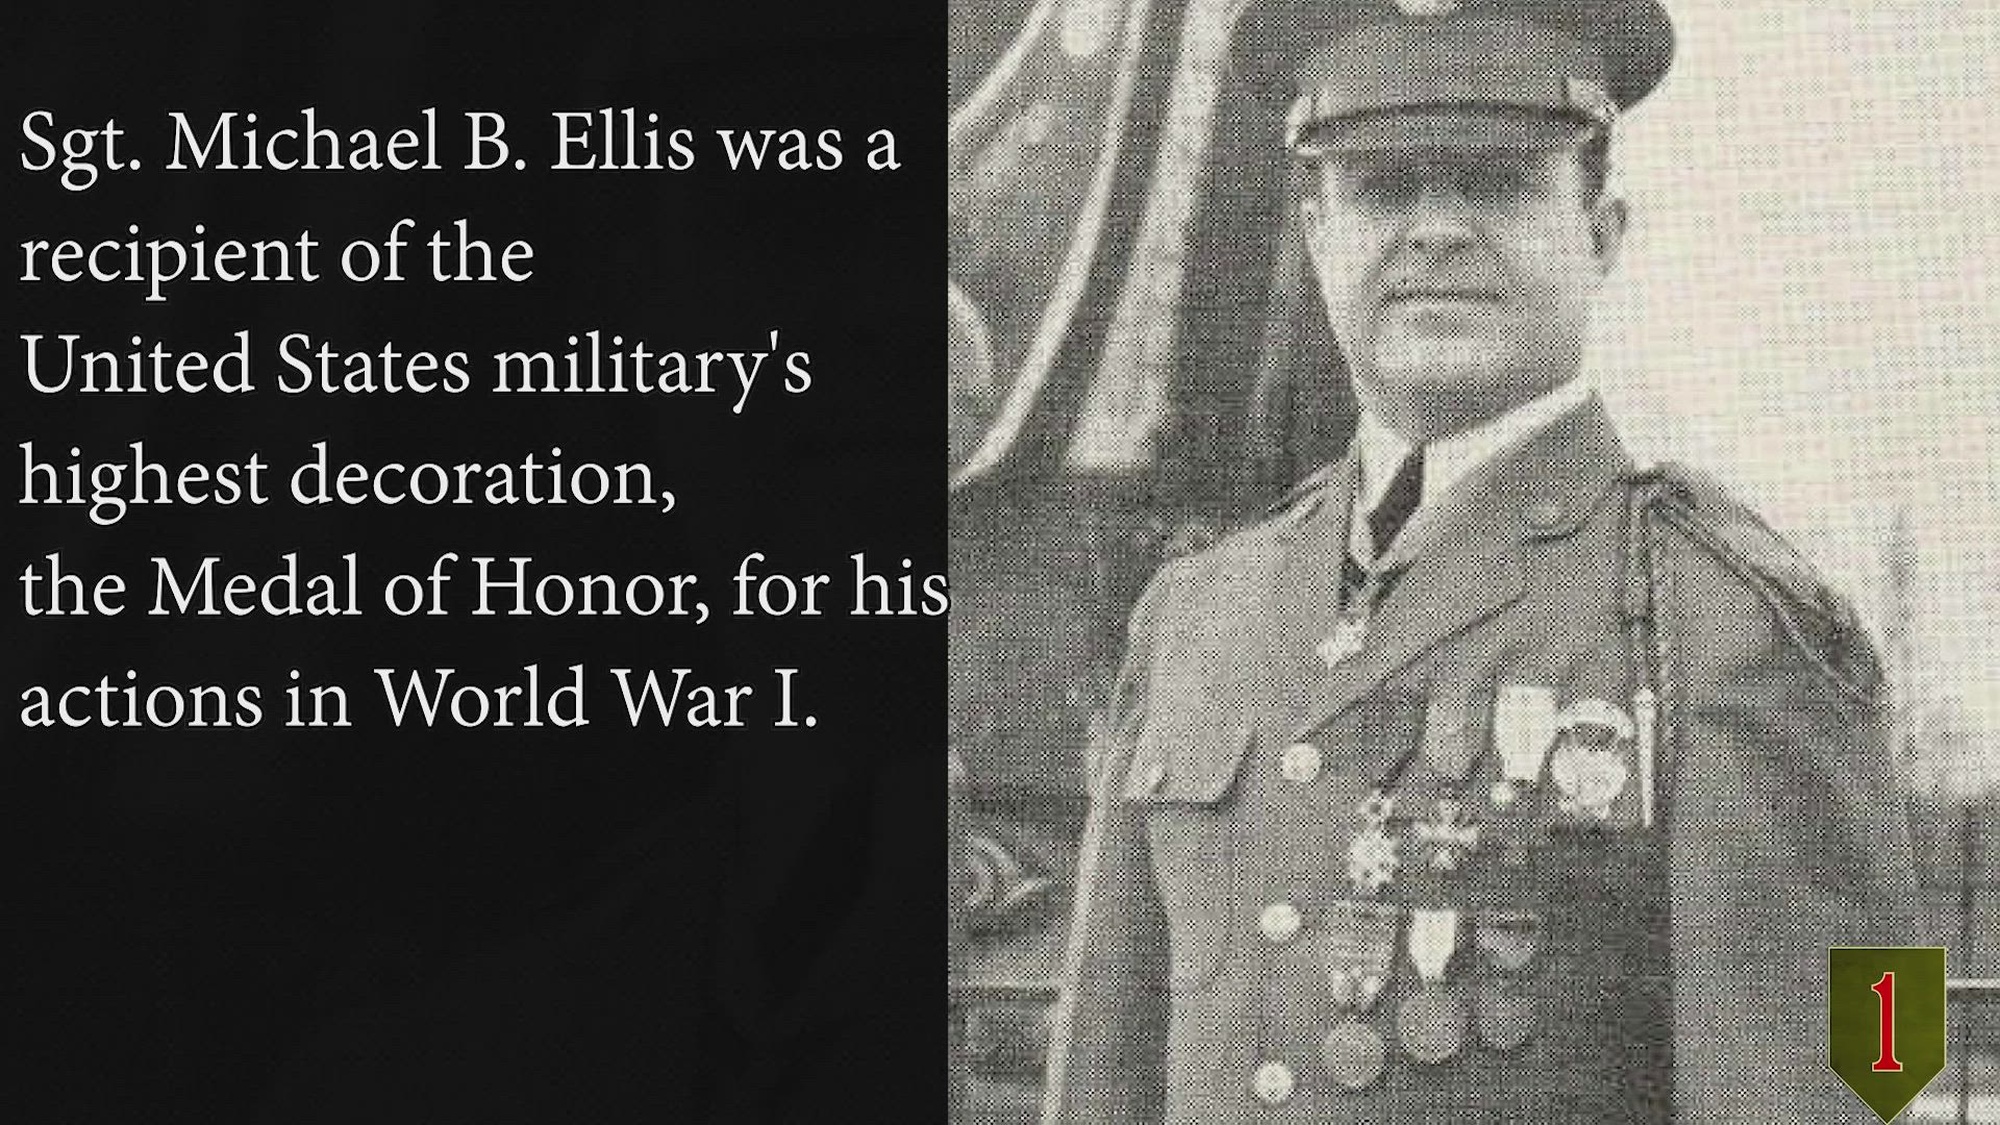 Michael B. Ellis was a United States Army sergeant and a recipient of the United States military's highest decoration, the Medal of Honor, for his actions in World War I. During the entire day’s engagement he operated far in advance of the first wave of his company, voluntarily undertaking most dangerous missions and single-handedly attacking and reducing machinegun nests.(U.S. Army video by Spc. Ellison Schuman)